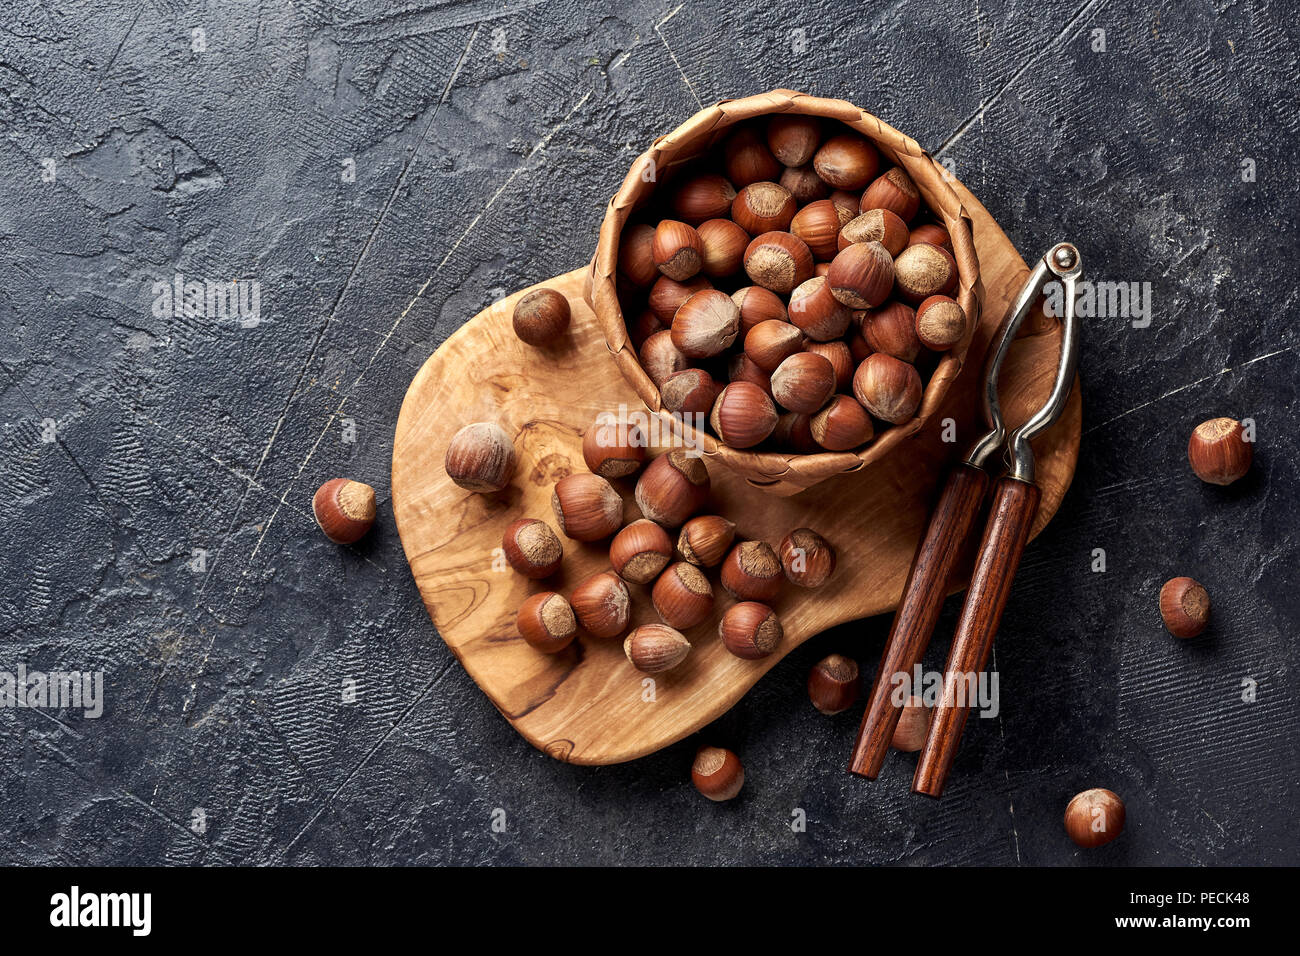 Hazelnut with nutcracker on olive wooden board. Copy space for text. Top view. Stock Photo